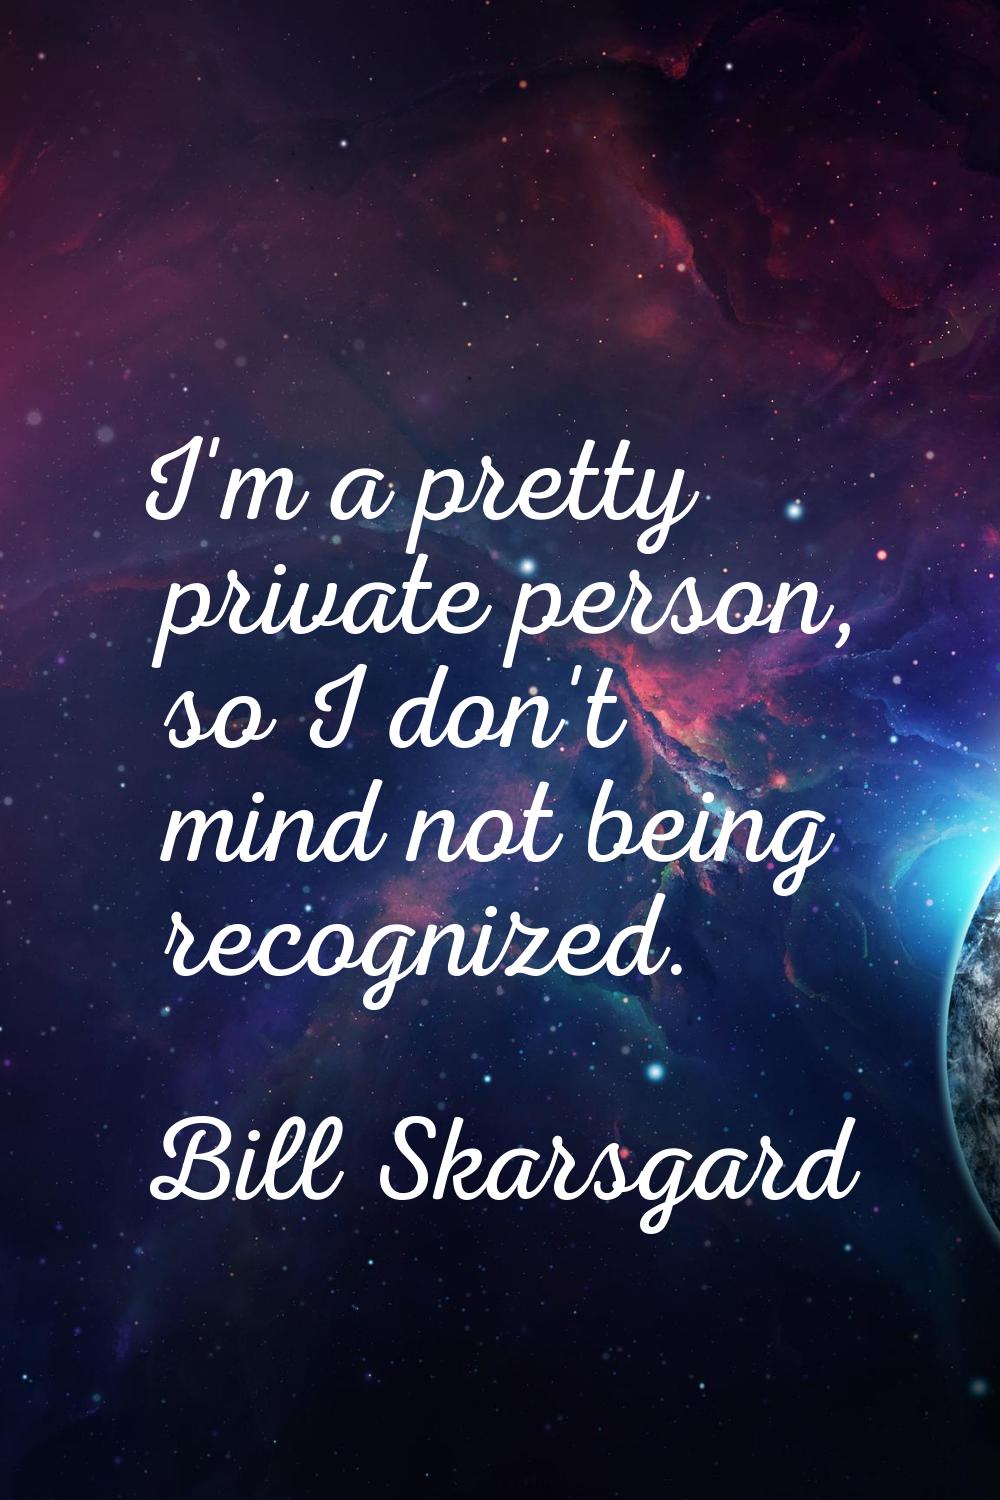 I'm a pretty private person, so I don't mind not being recognized.